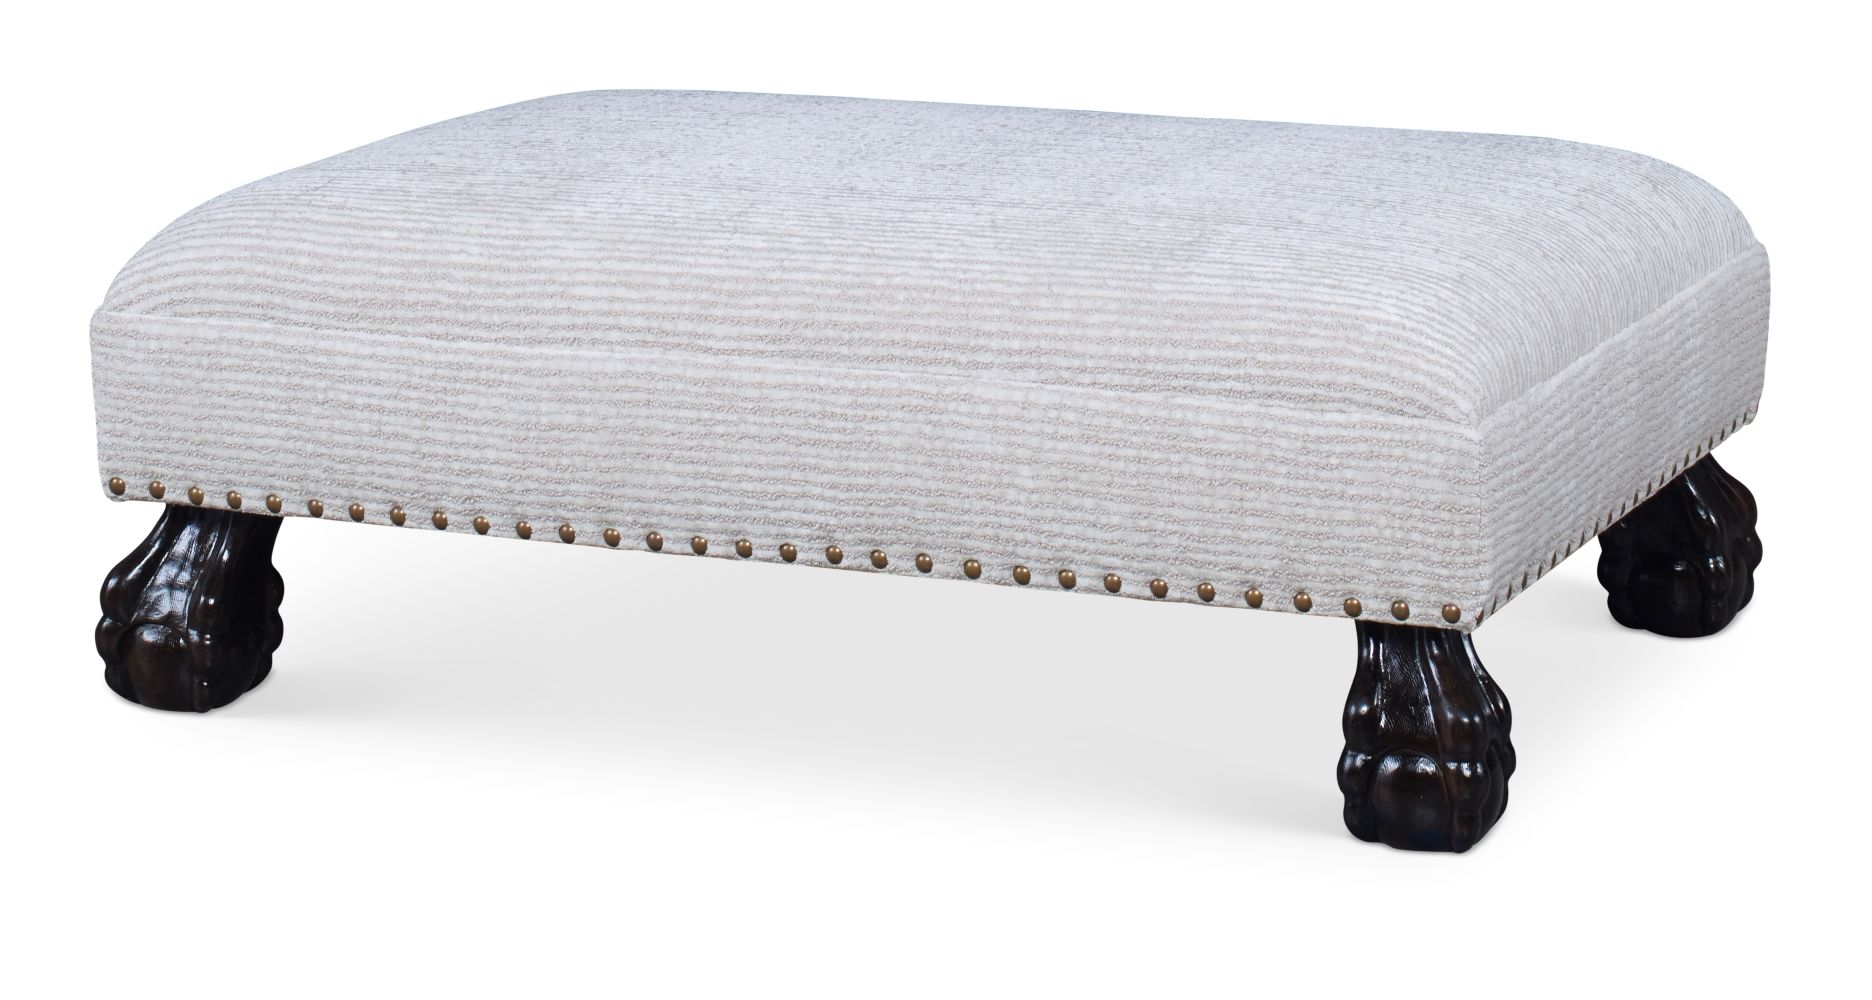 UPLAND COCTAIL OTTOMAN